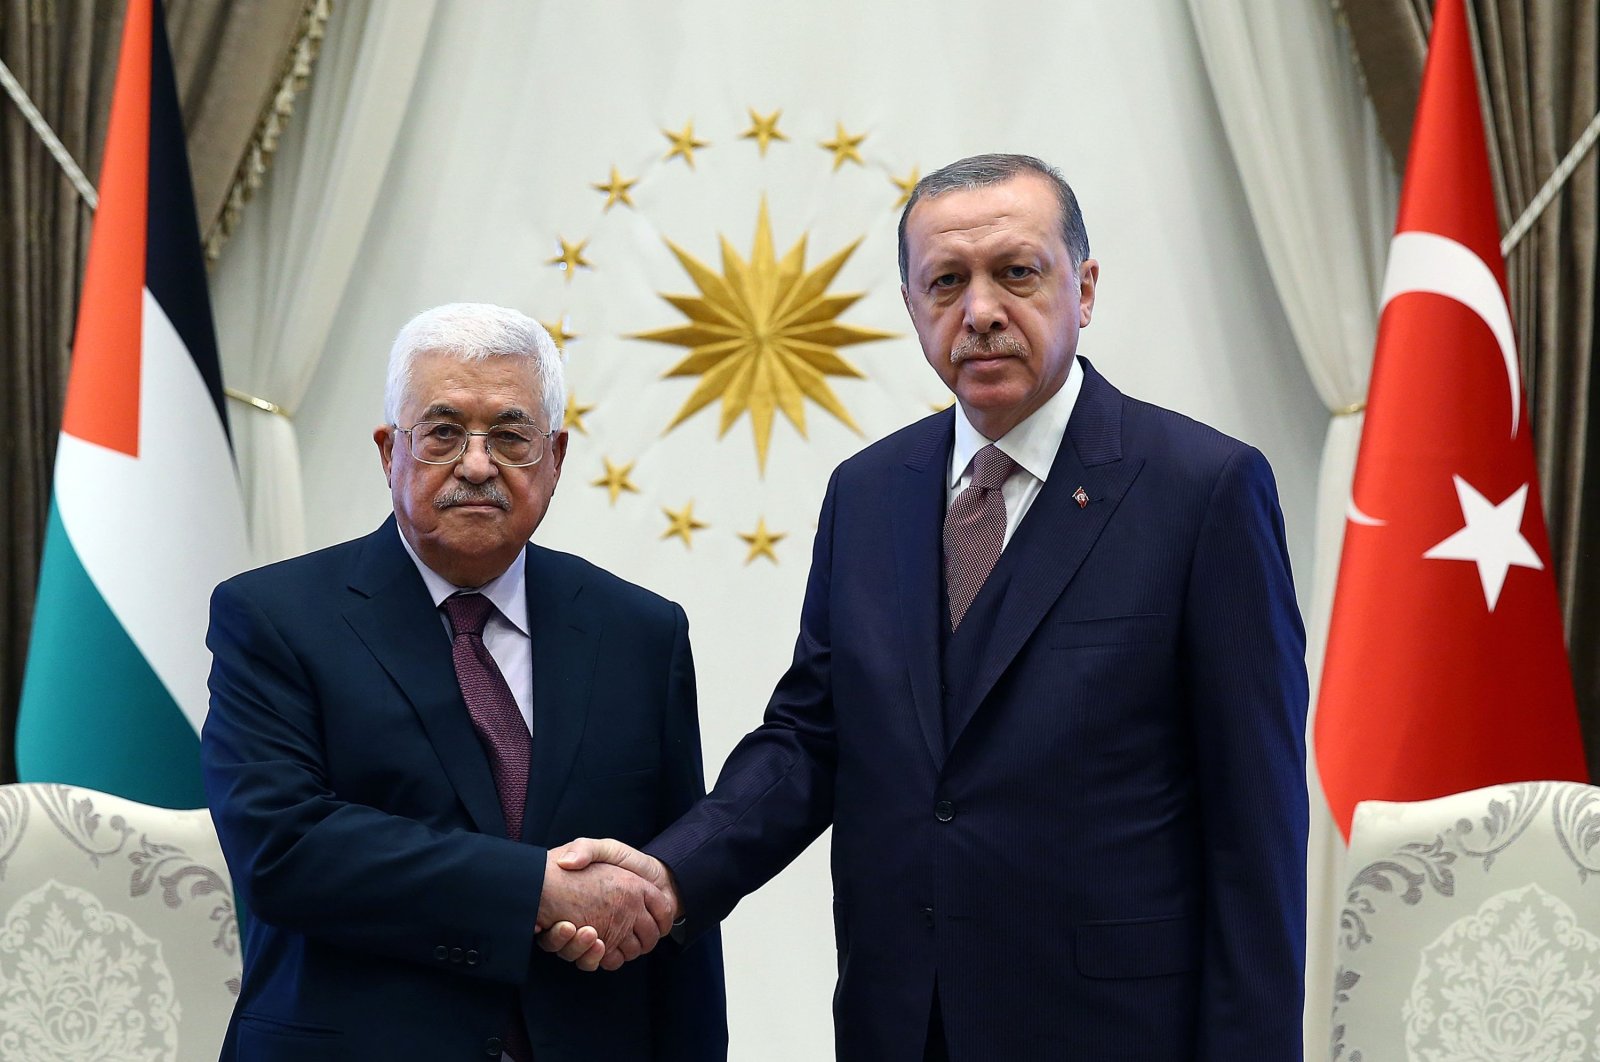 President Recep Tayyip Erdoğan shakes hands with Palestinian President Mahmoud Abbas at the Presidential Complex in Ankara on Oct. 28, 2017 (Sabah File Photo)